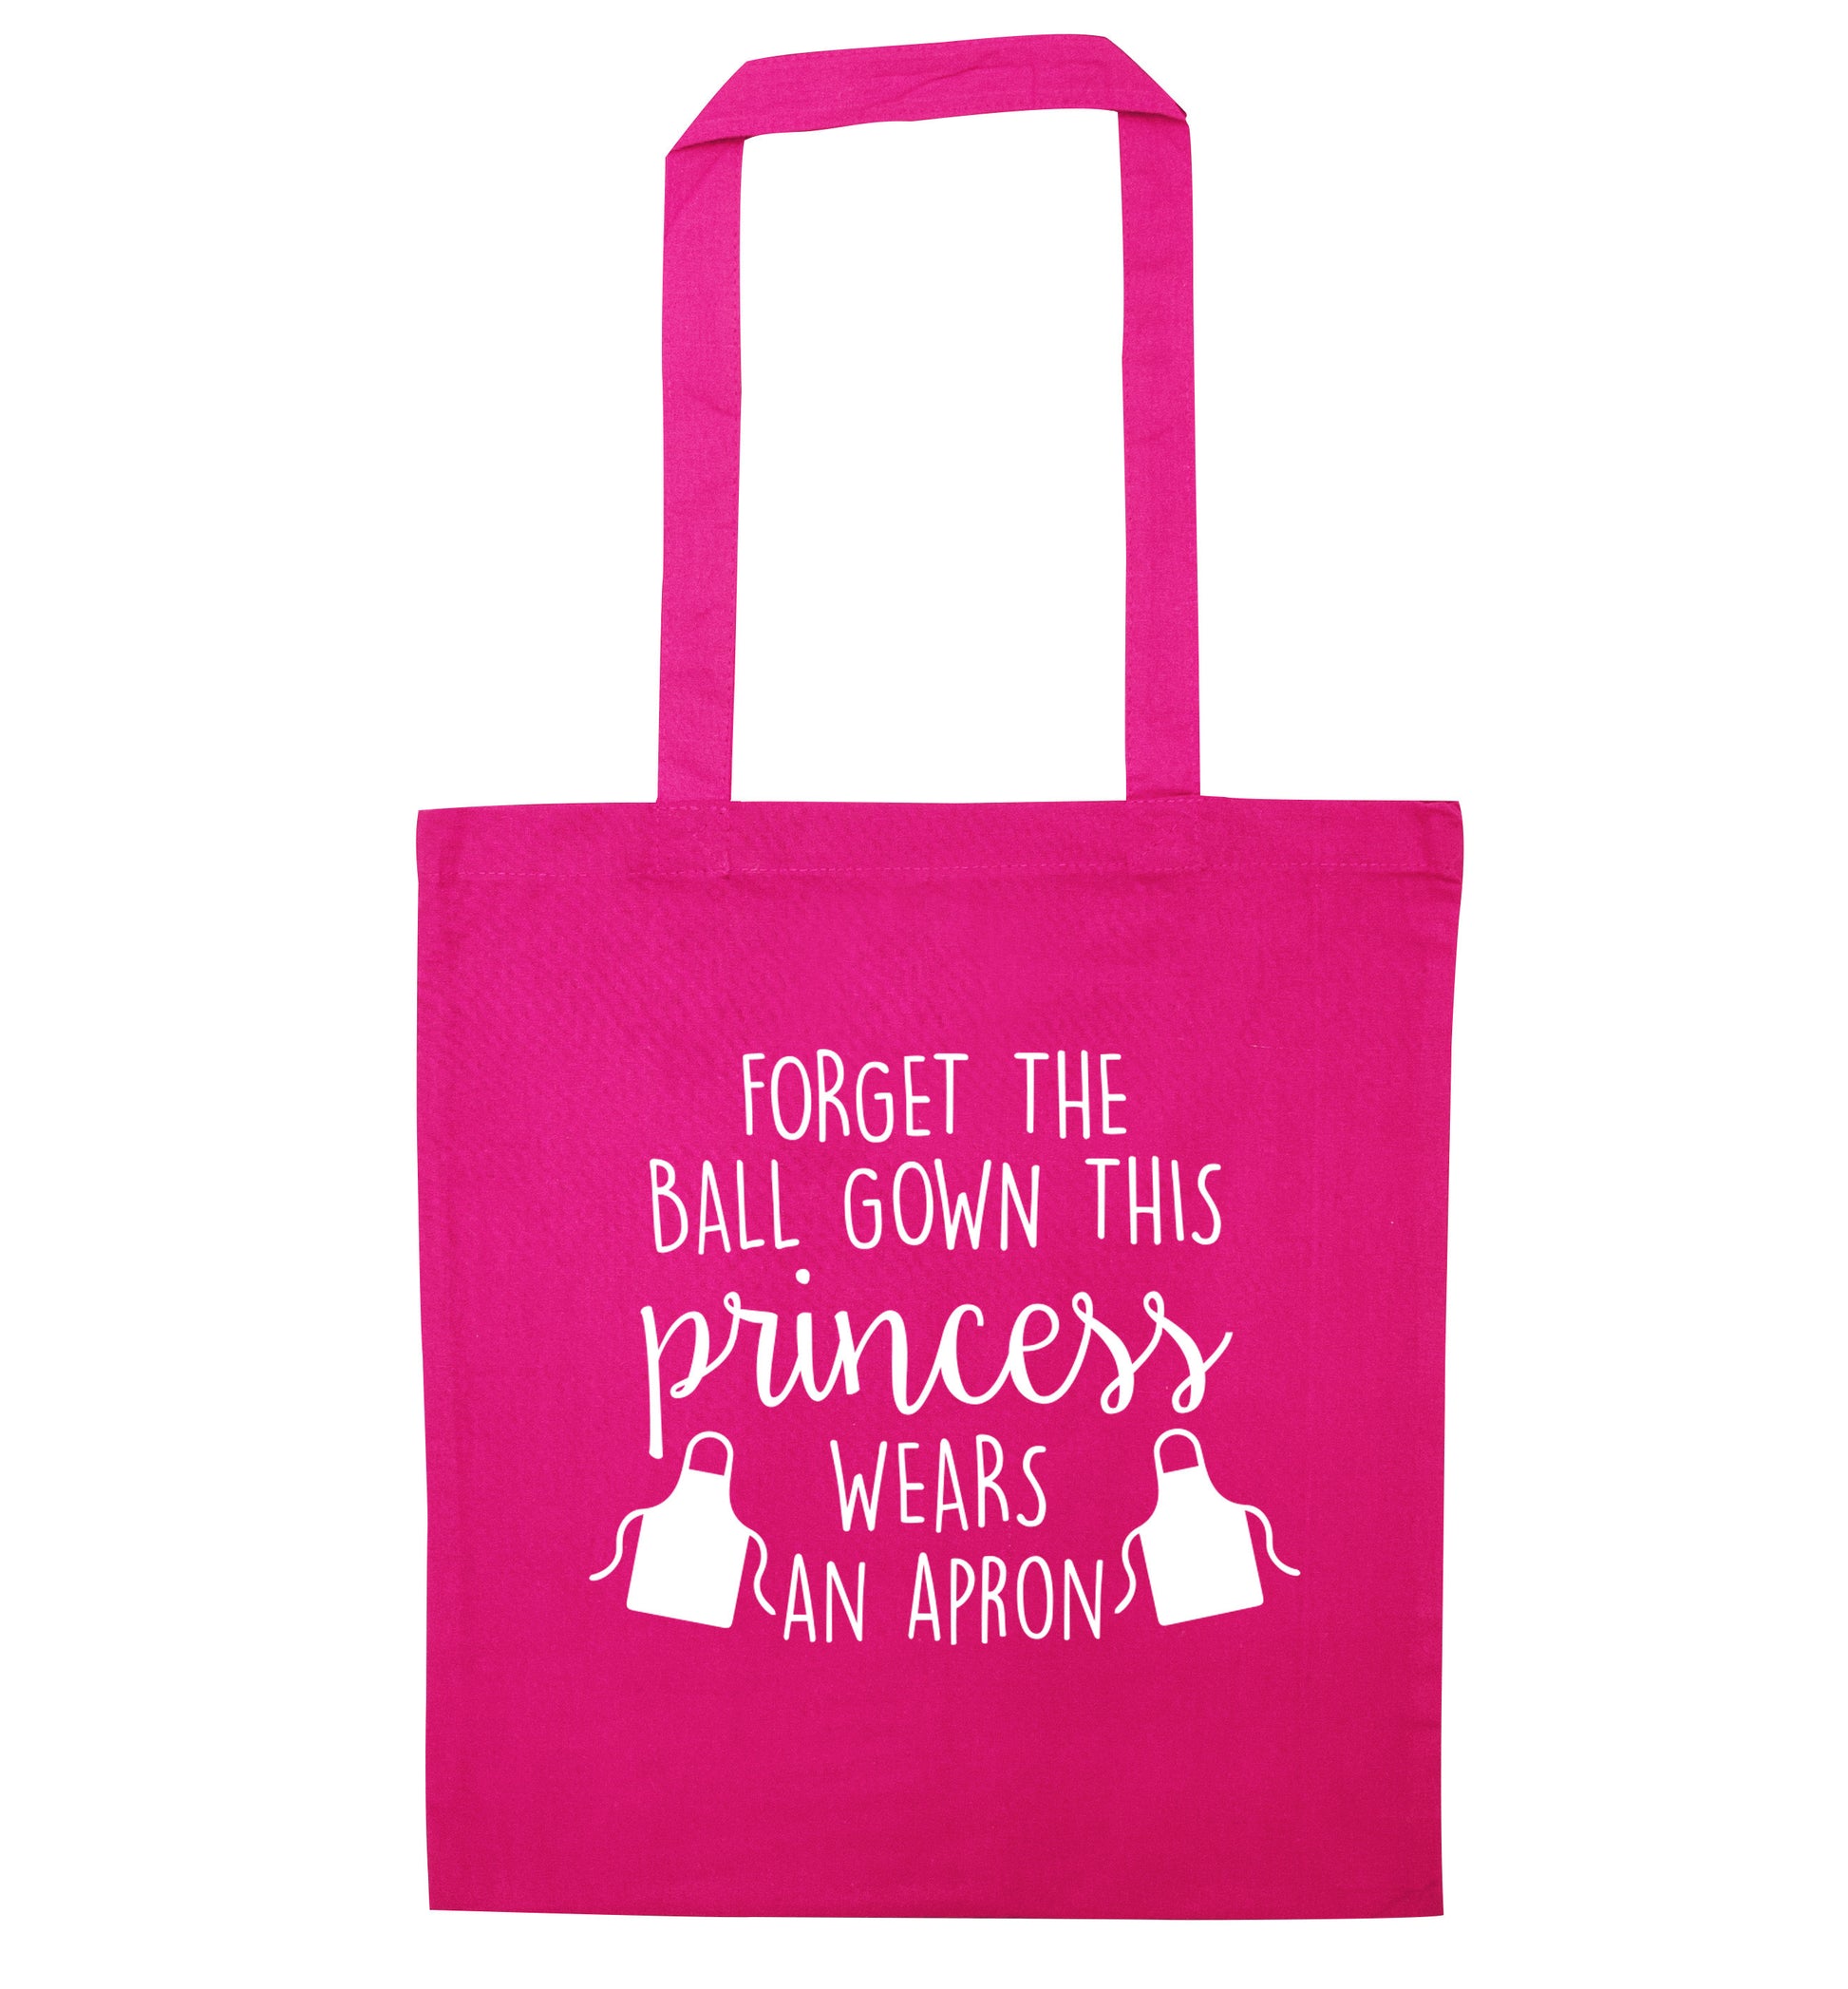 Forget the ball gown this princess wears an apron pink tote bag